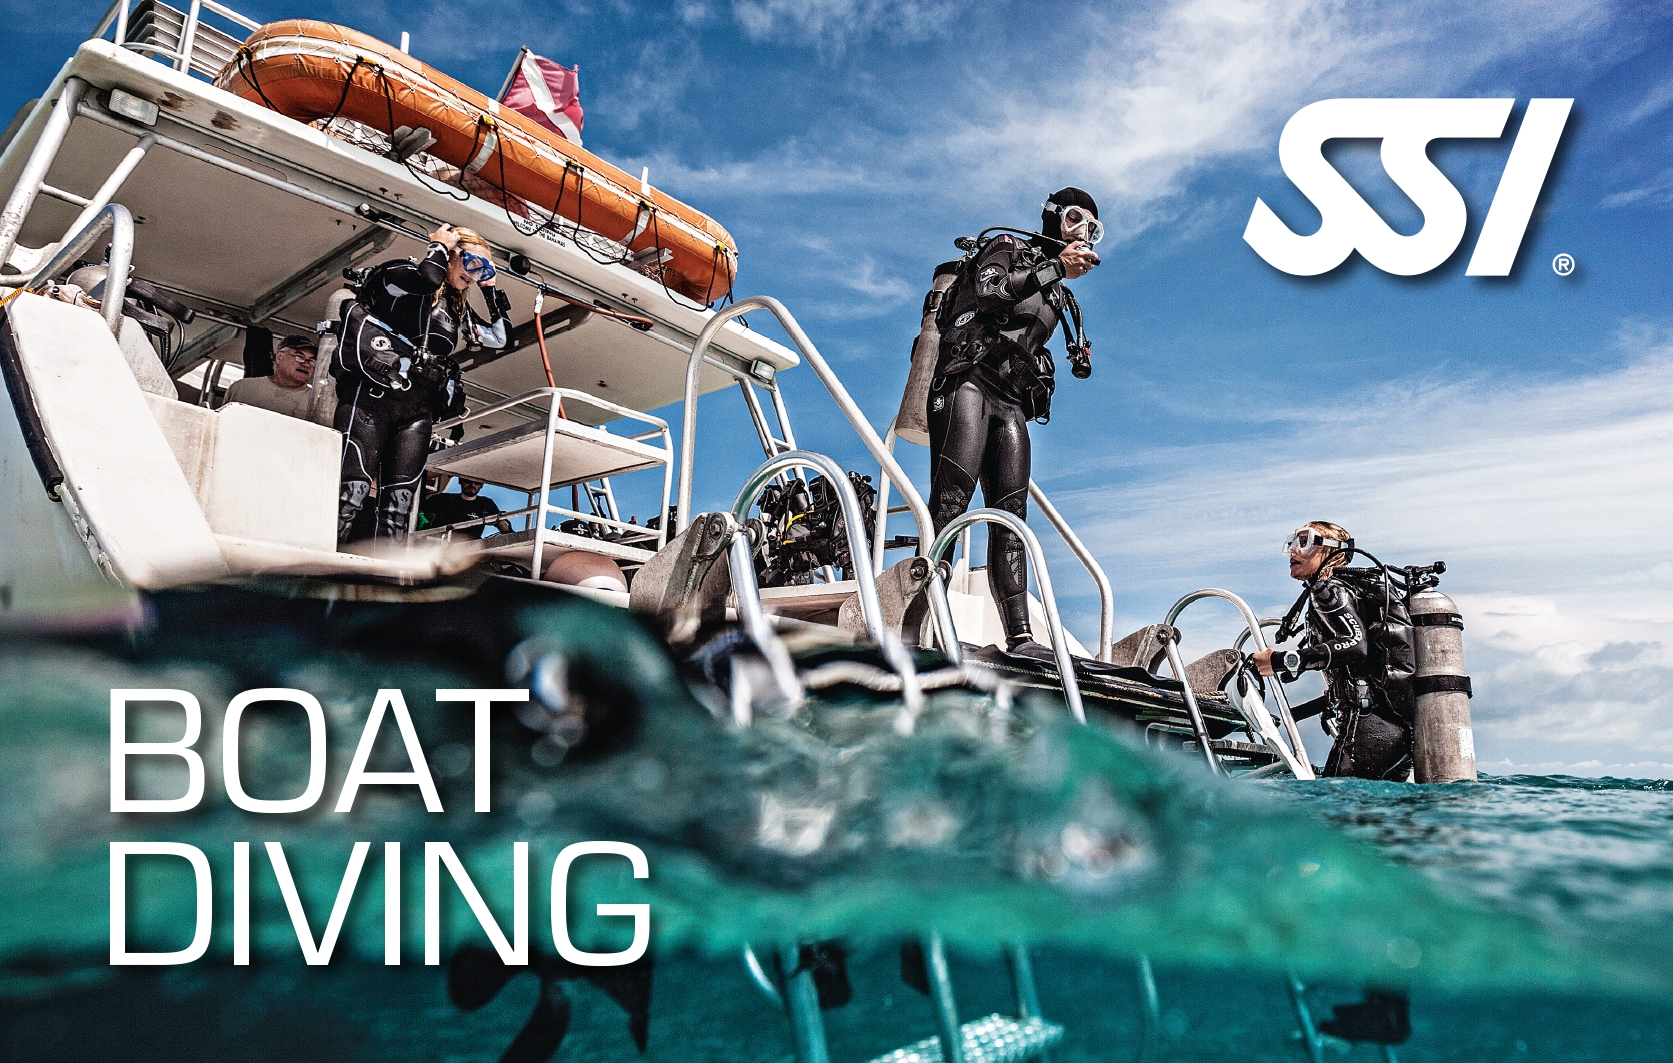 SSI Specialty Boat Diving